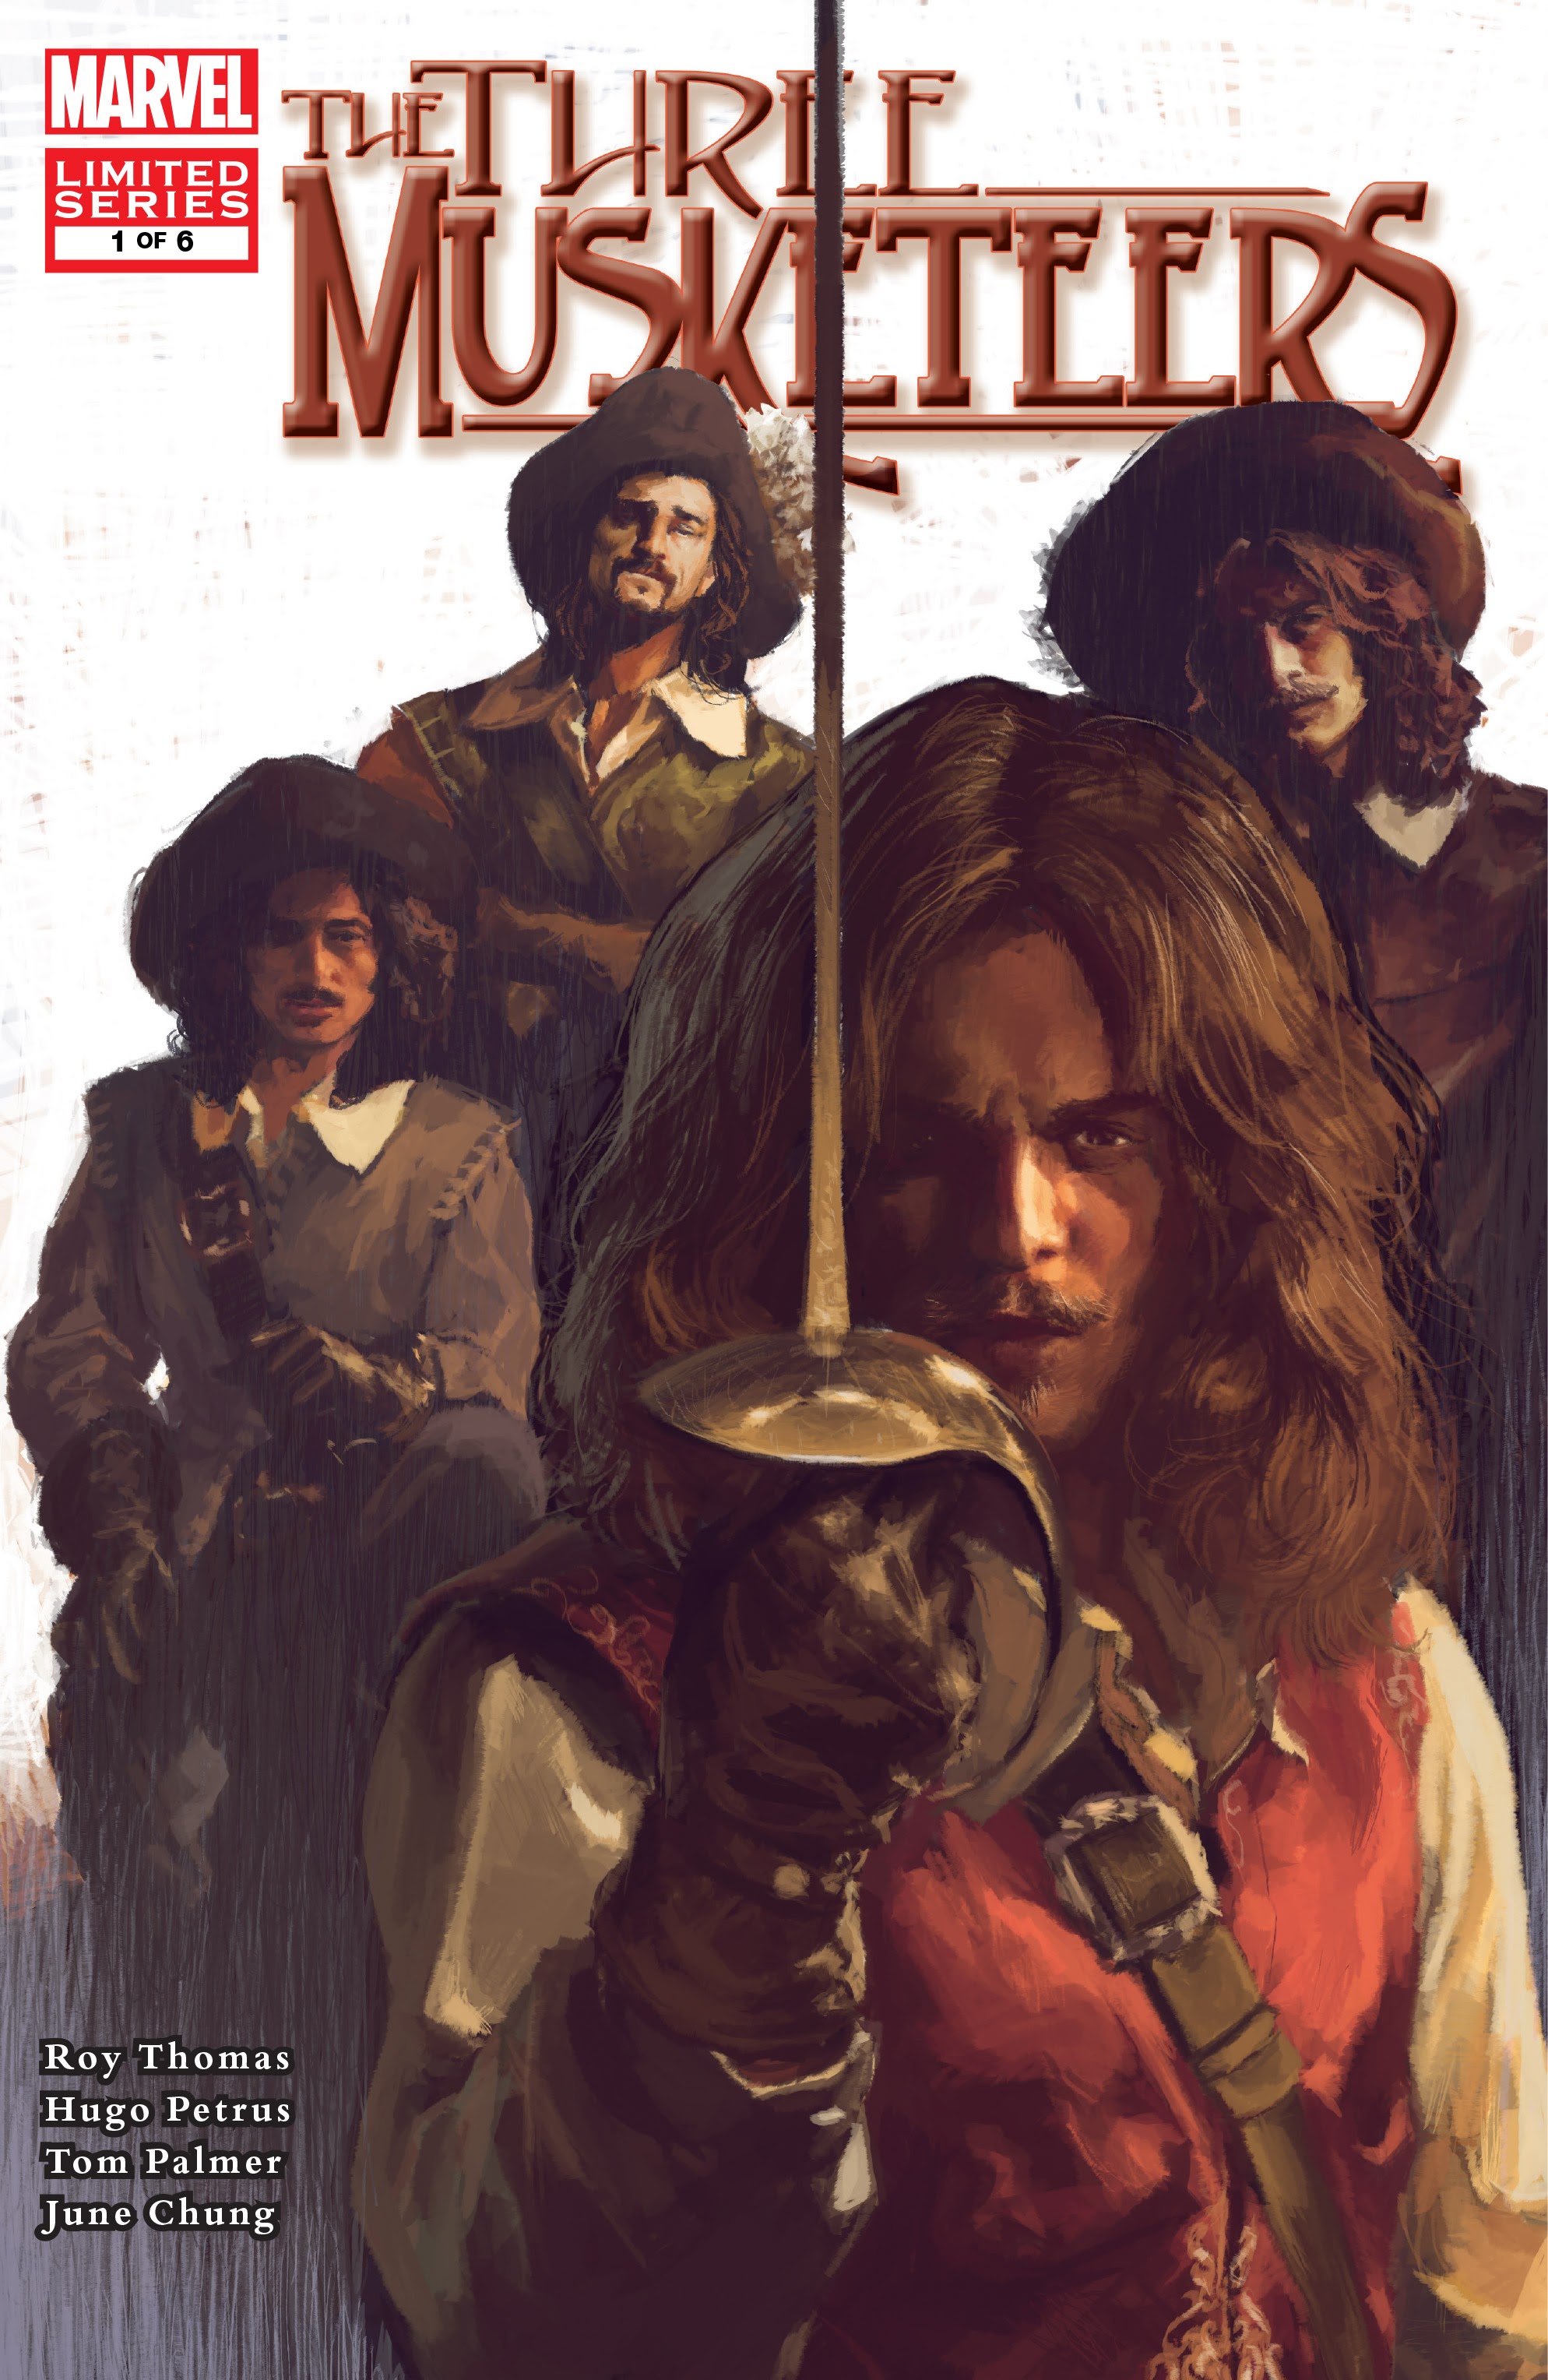 Read online Marvel Illustrated: The Three Musketeers comic -  Issue #1 - 1